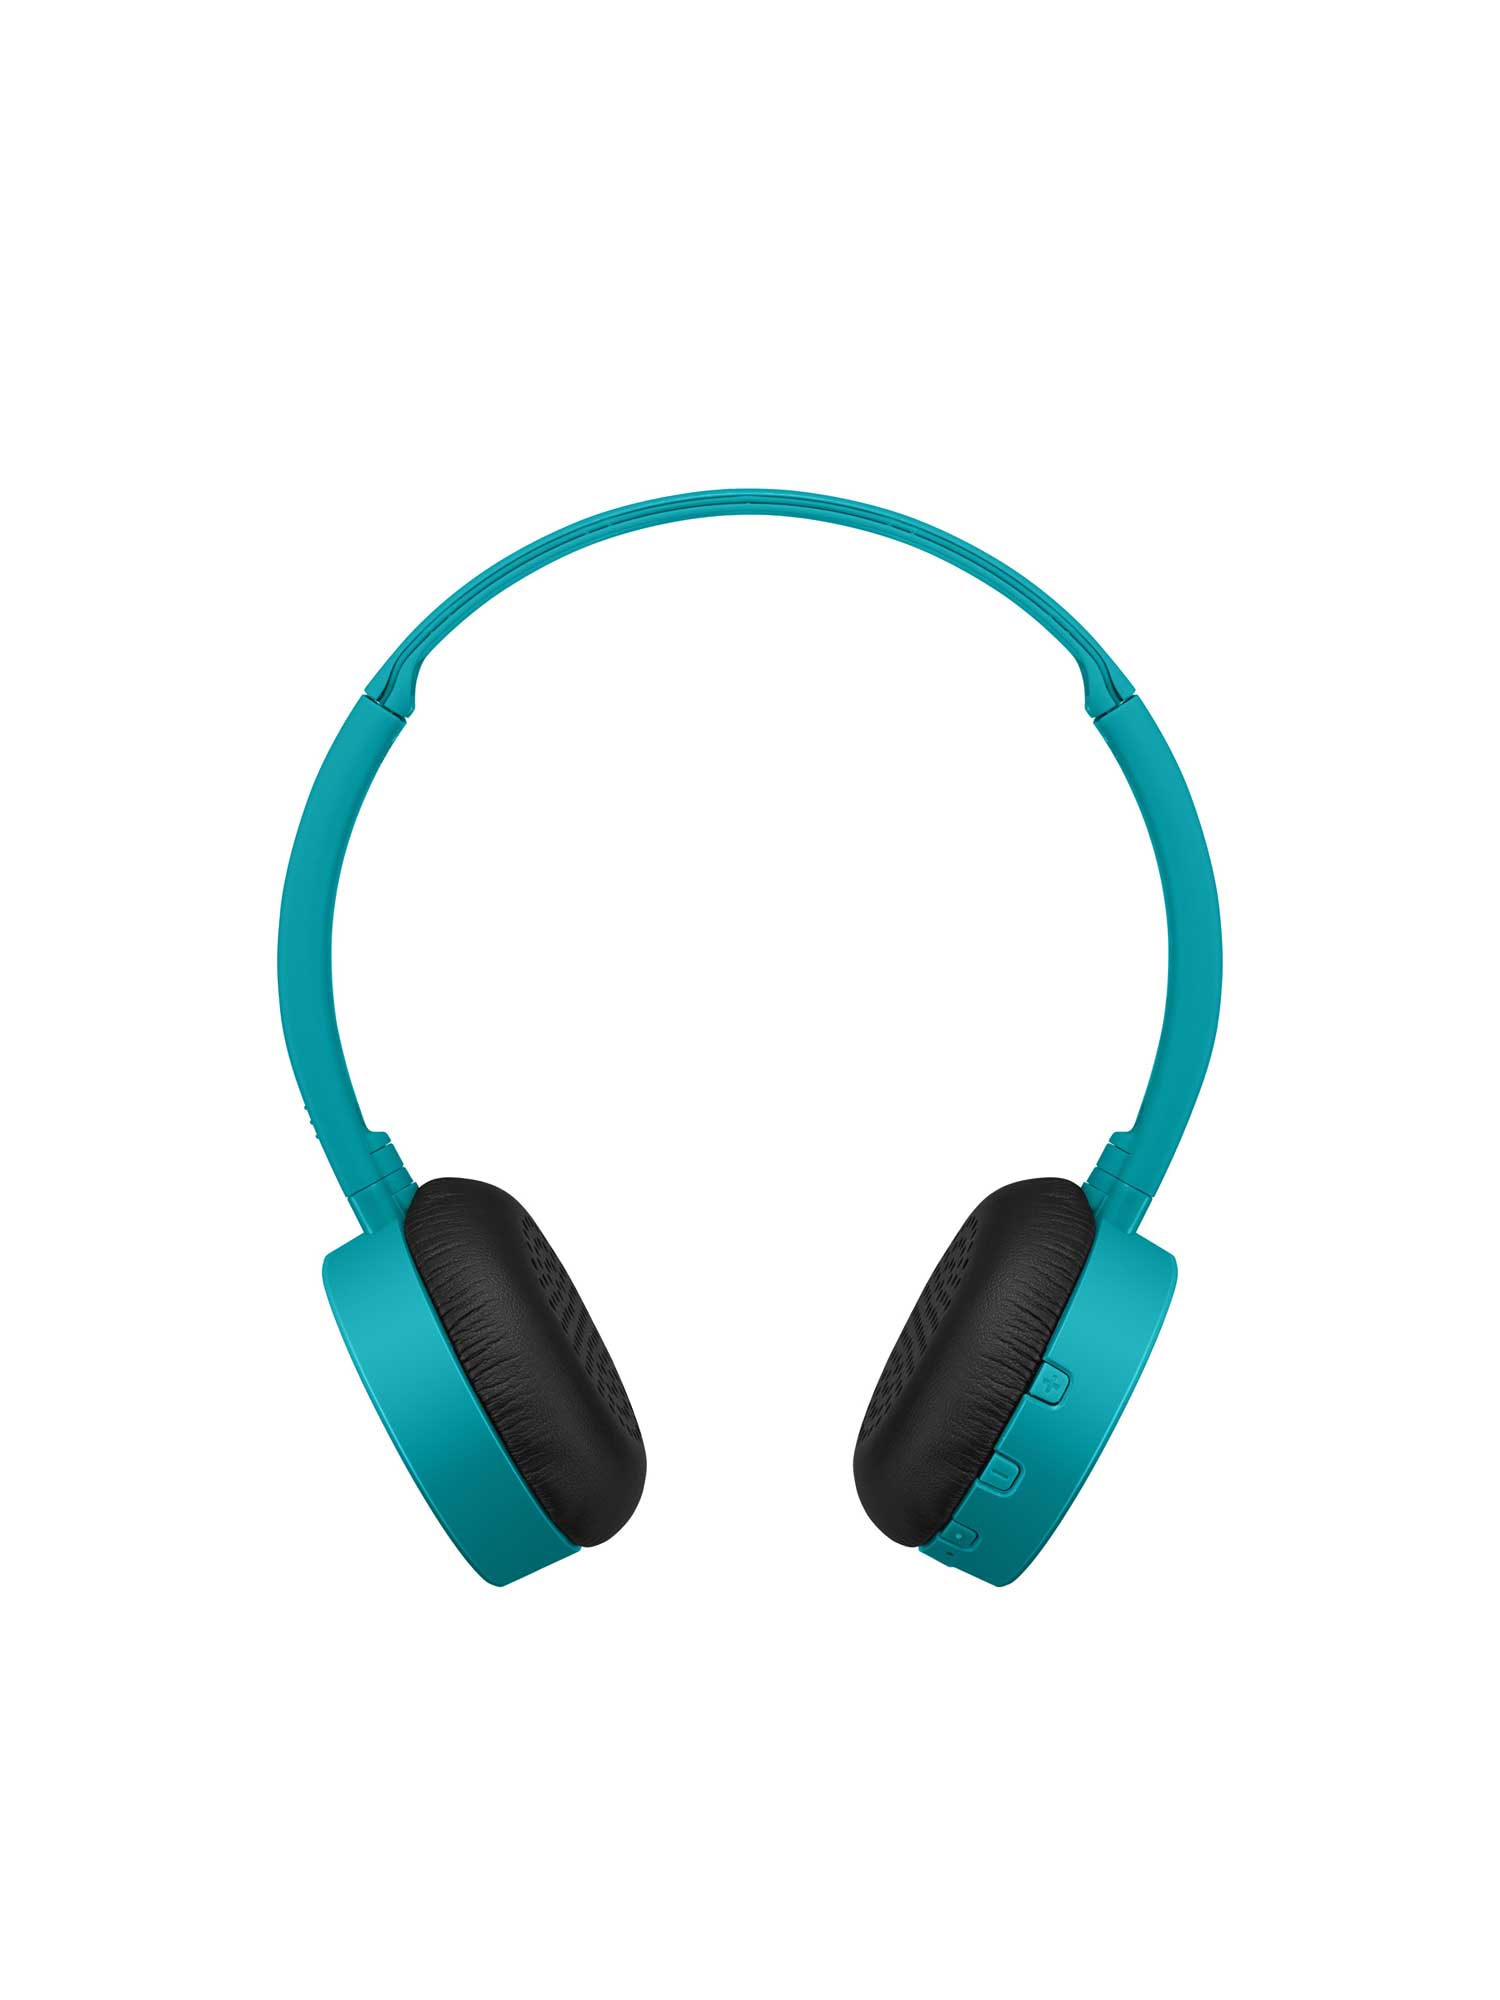 HA-S24W-Z in turquoise Bluetooth headphones comfortable fit